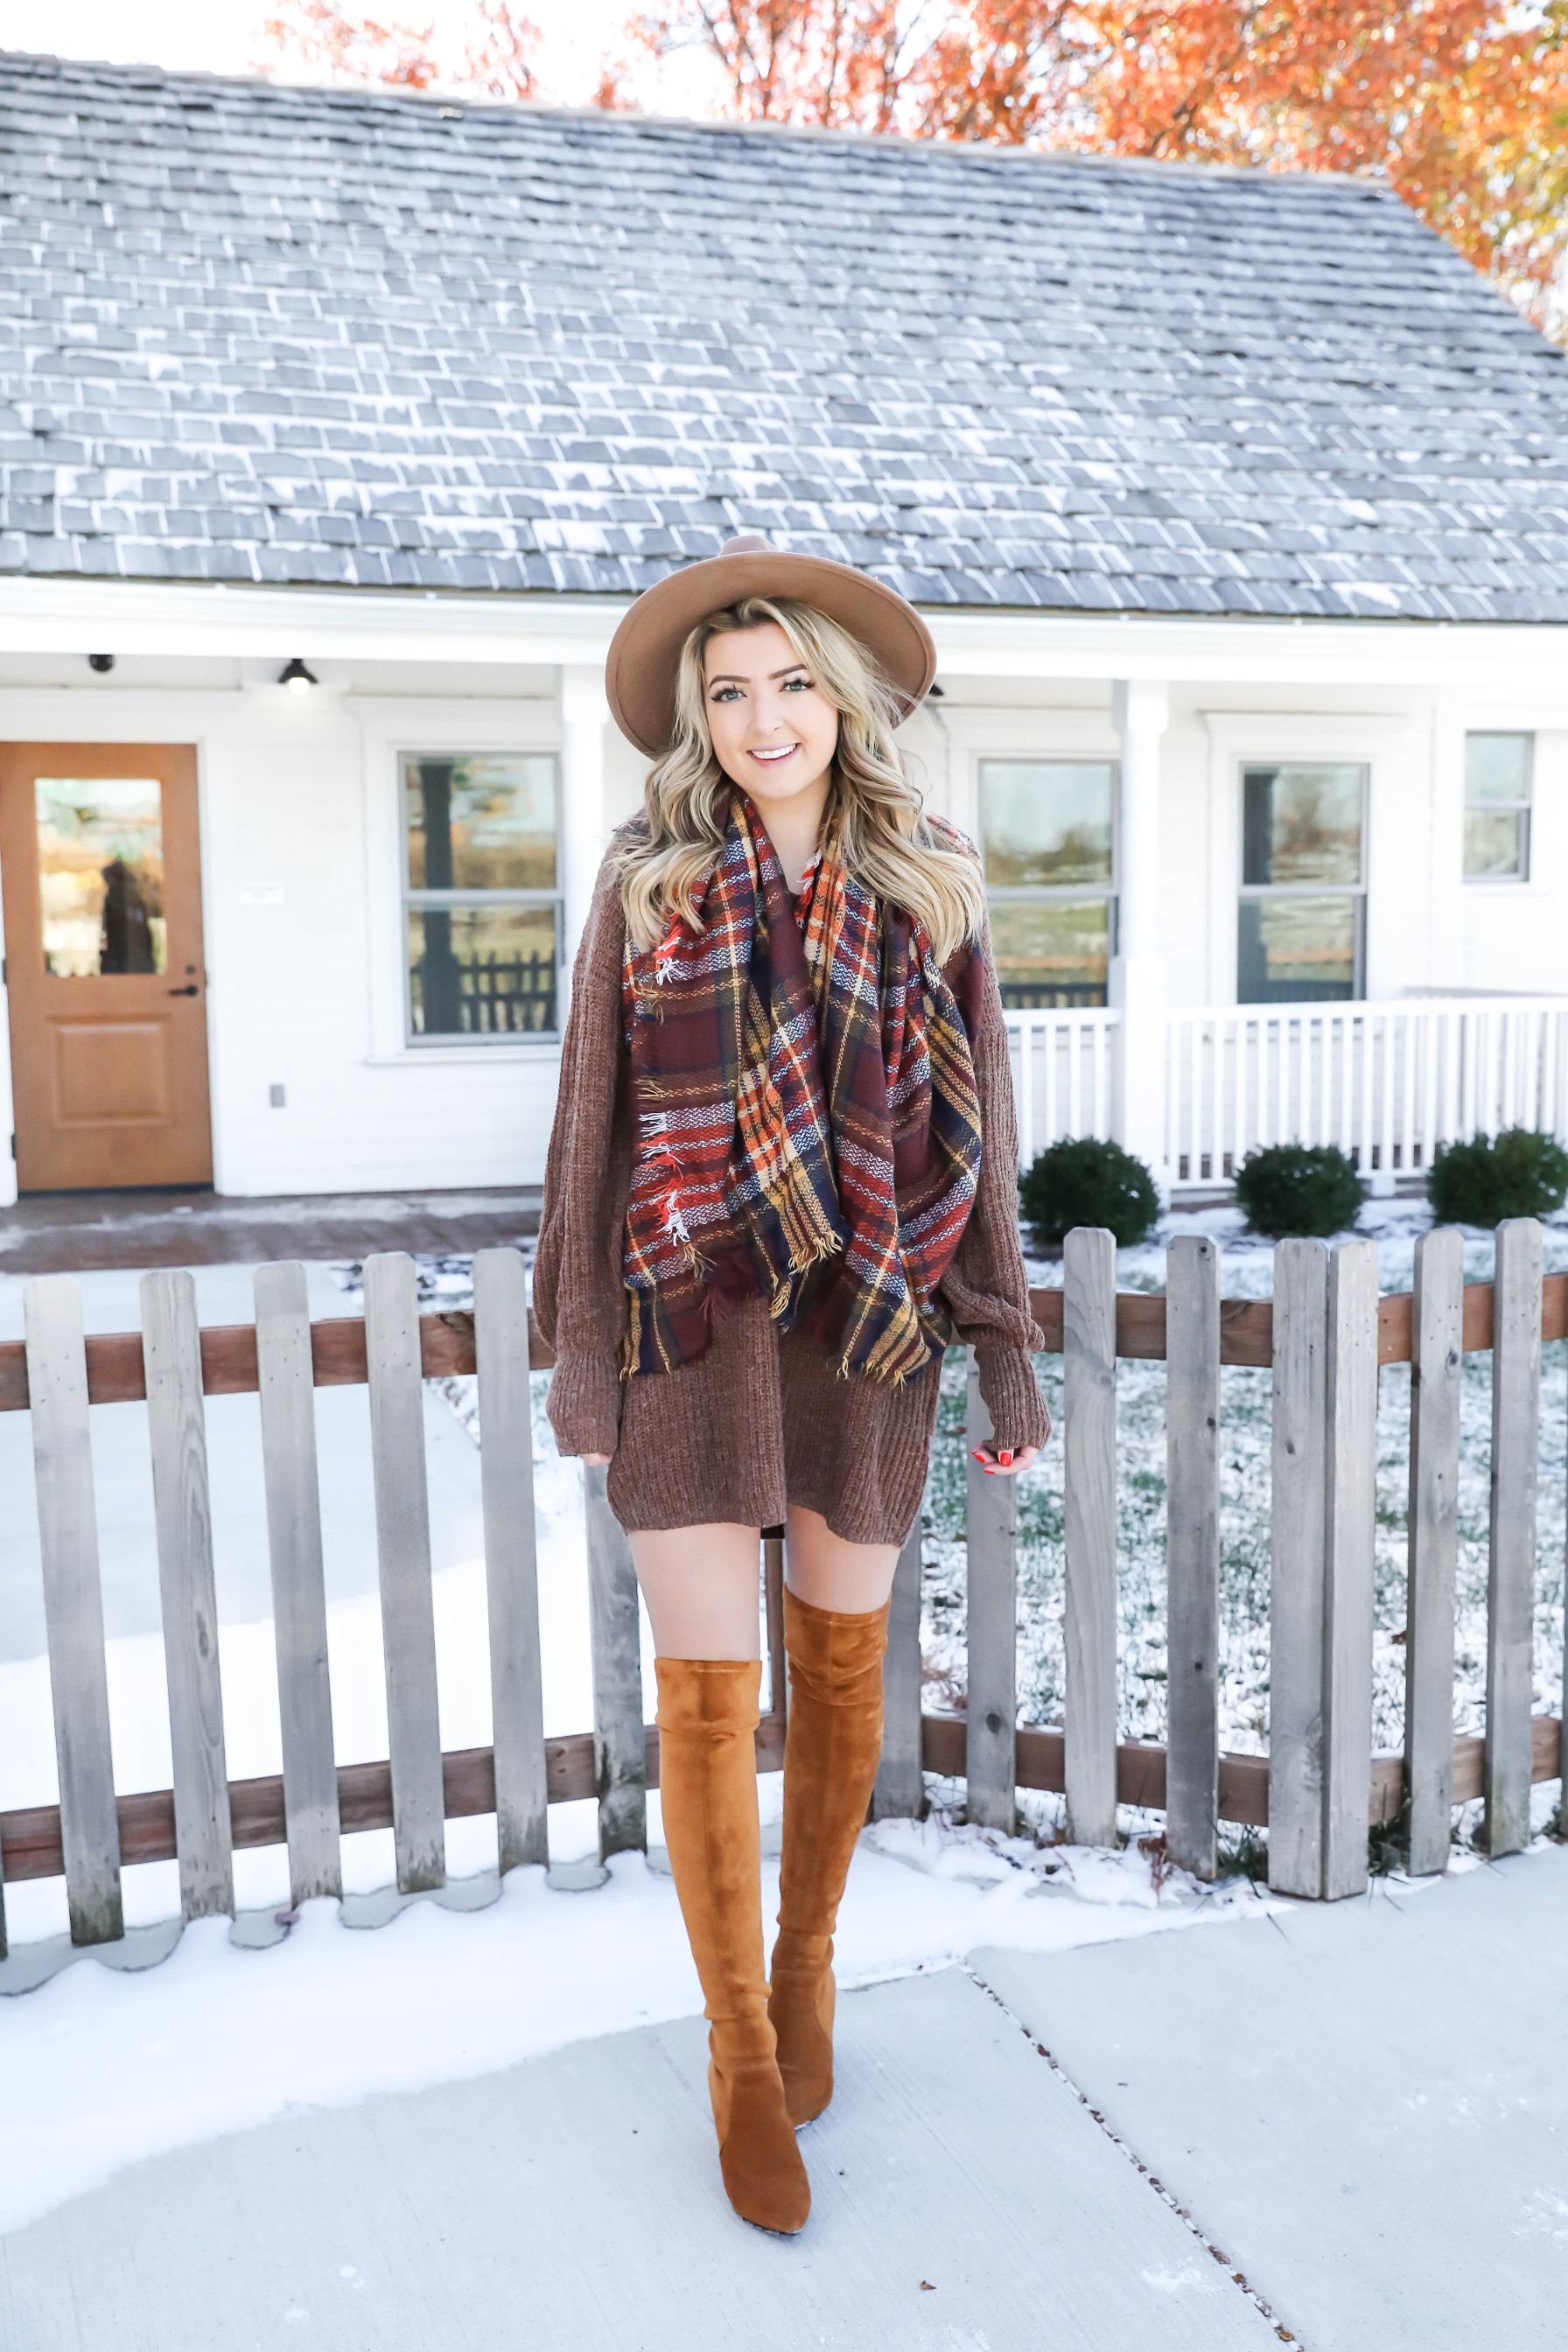 12 Outfit Ideas for Thanksgiving